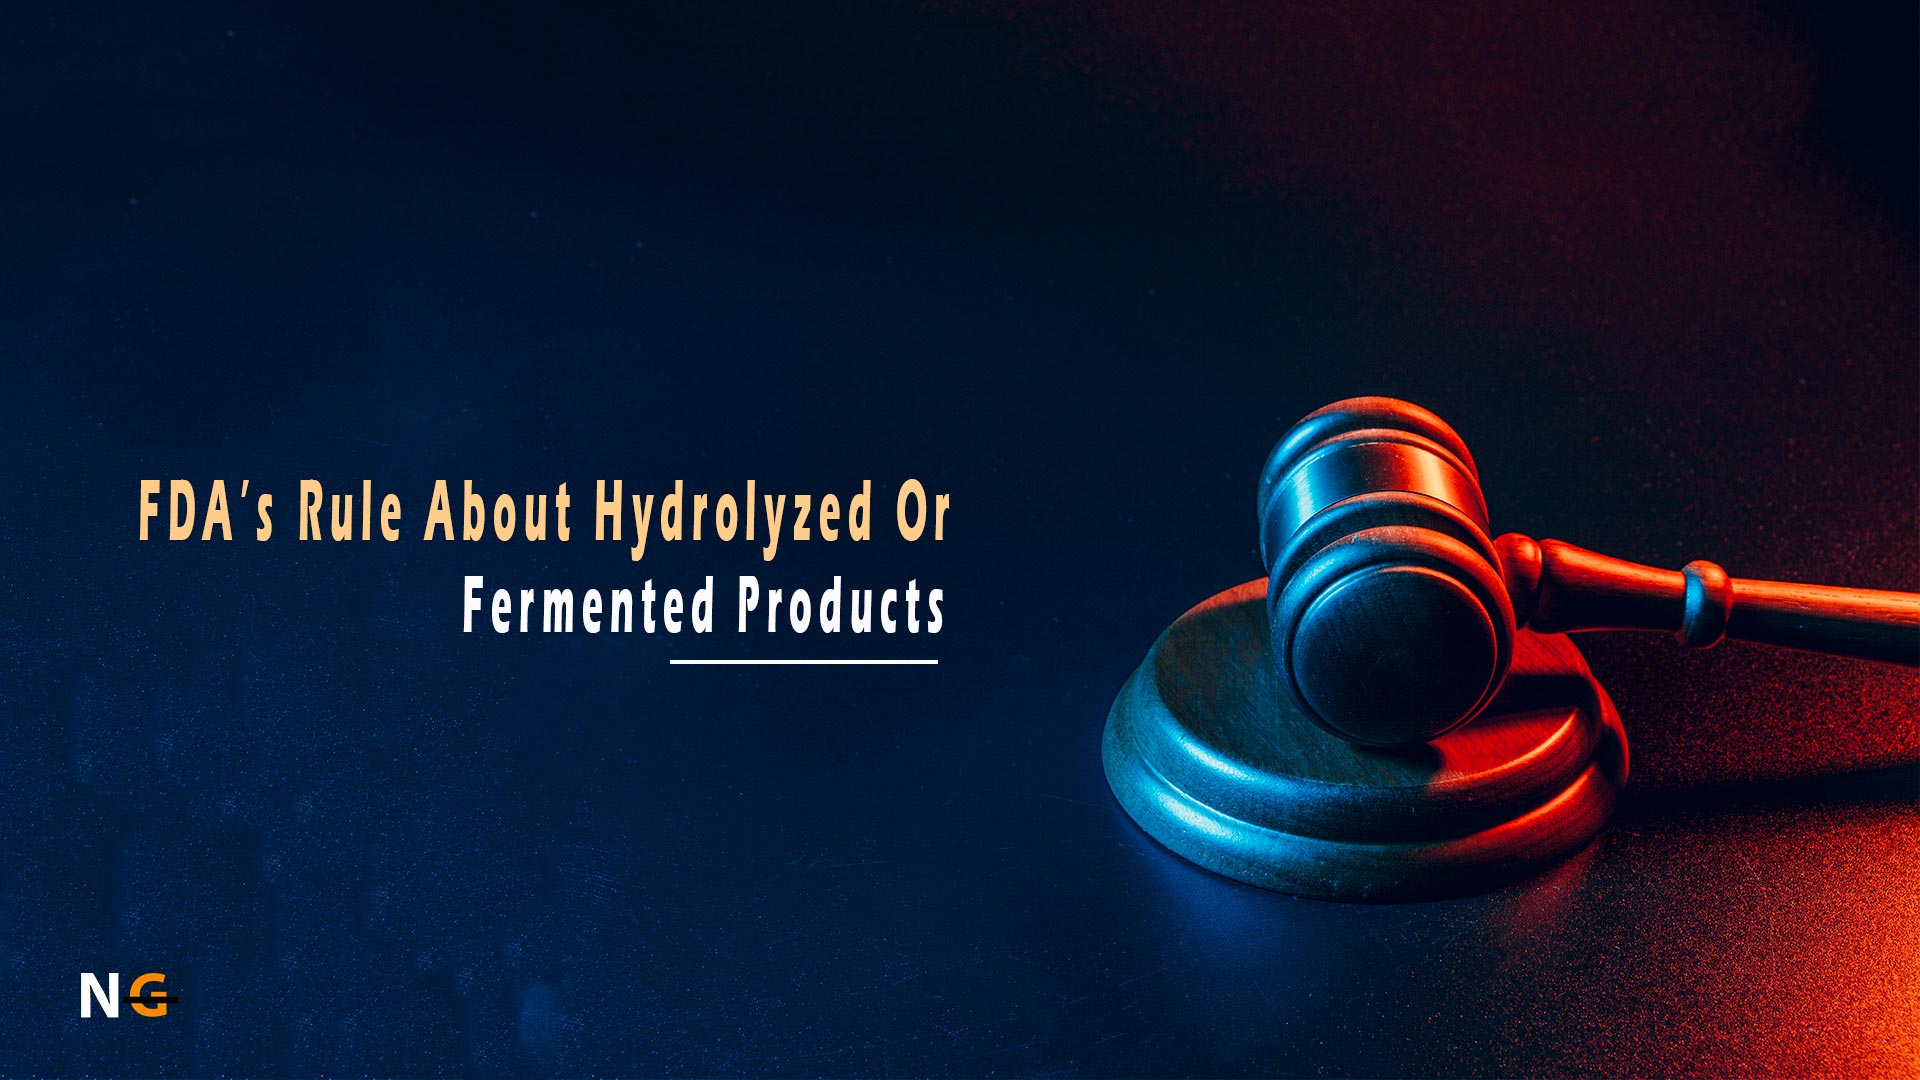 FDA’s Rule About Hydrolyzed or Fermented Products